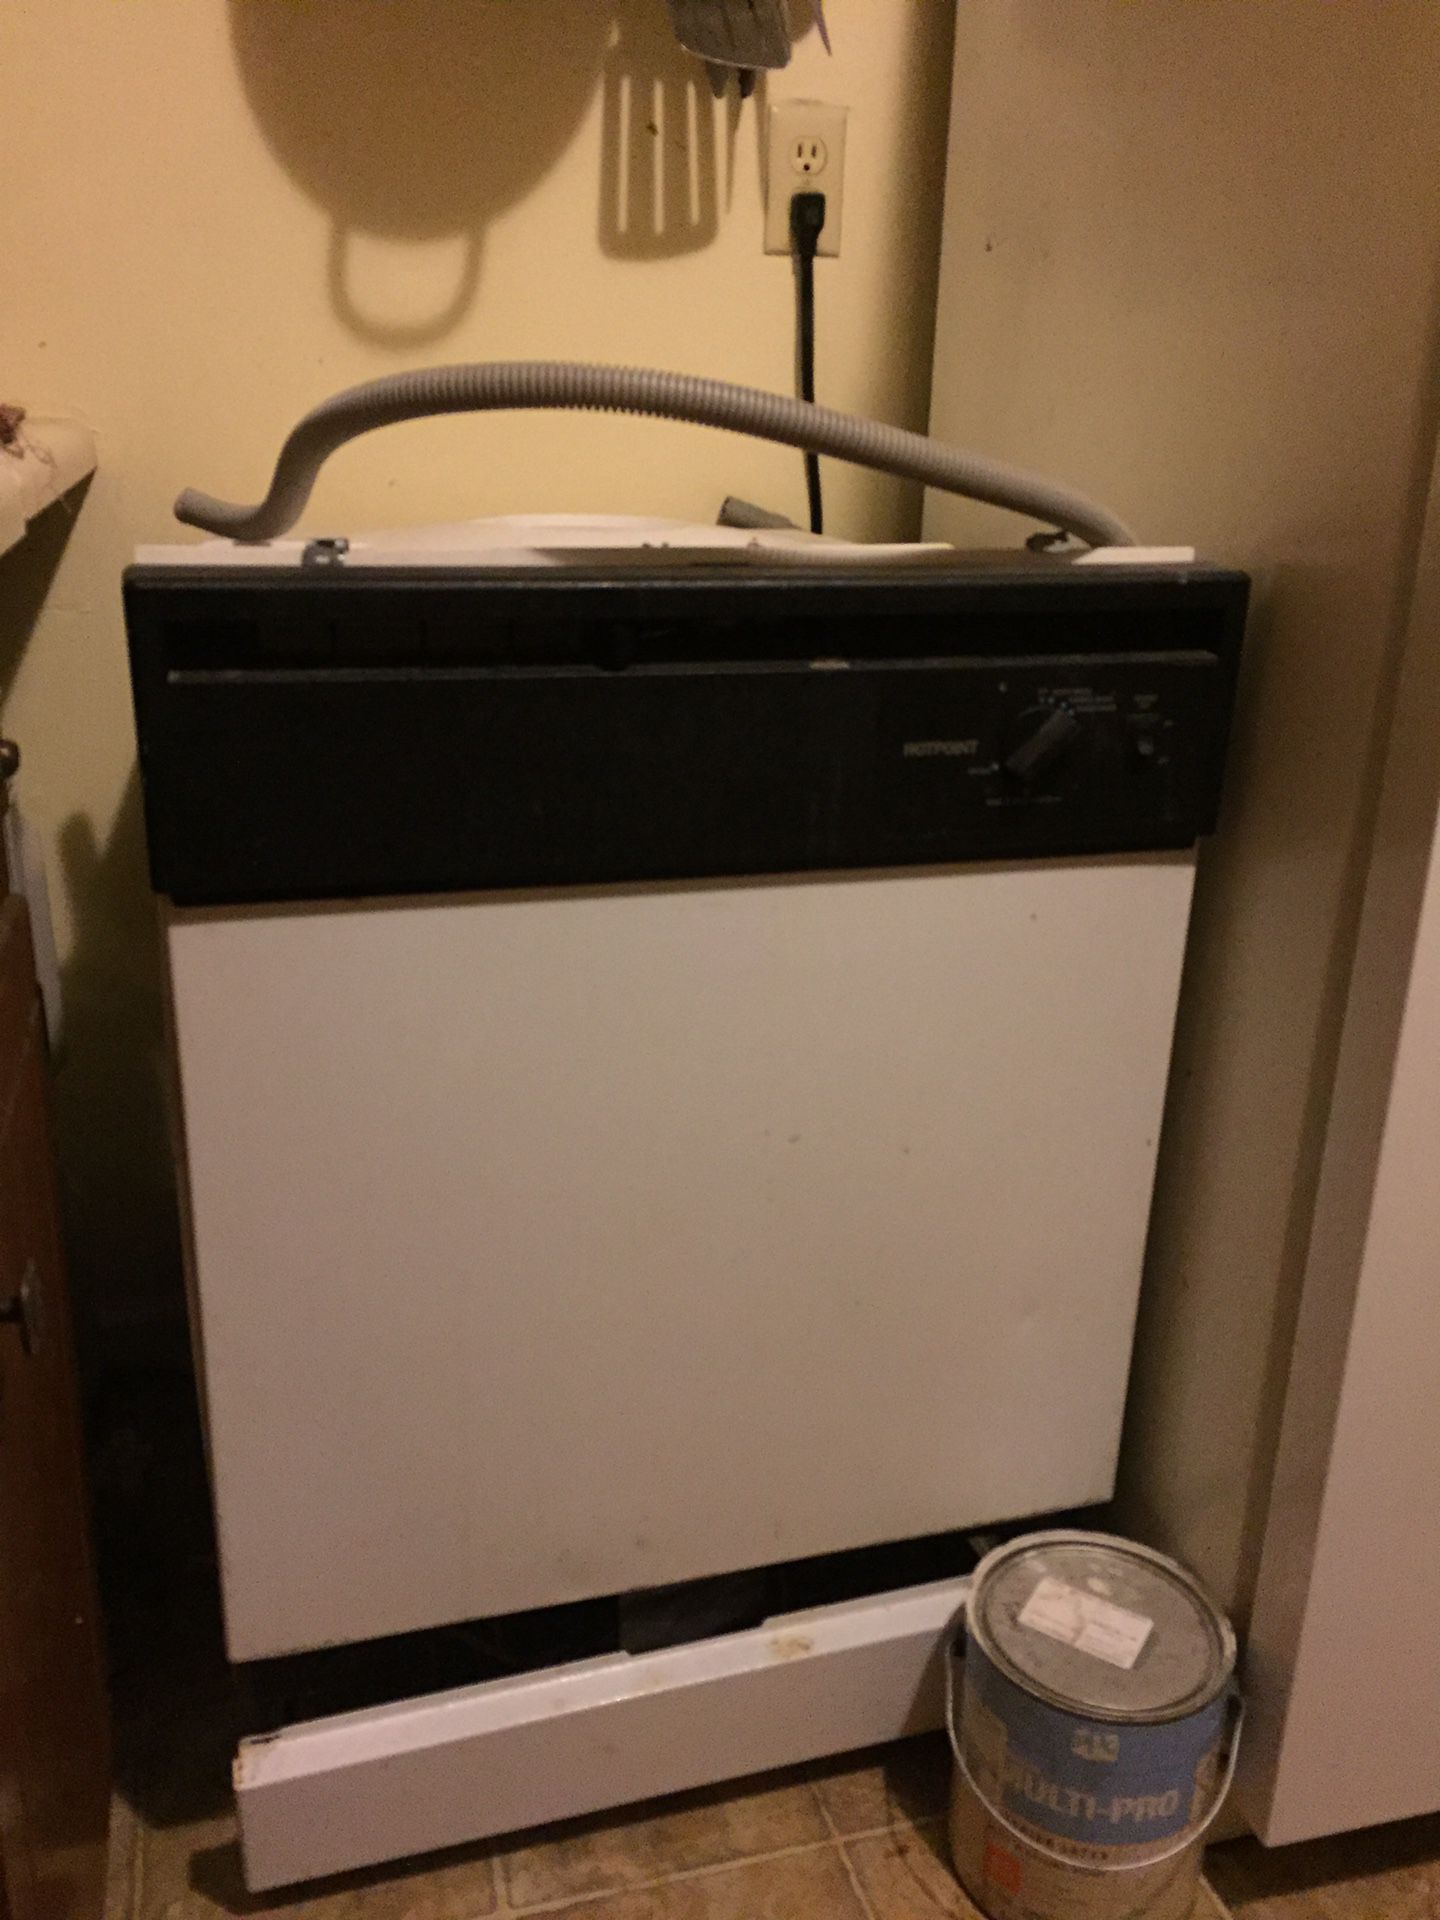 Hotpoint Dishwasher. We are moving and don’t need it. We got it to build a base and make portable, but never got around to it